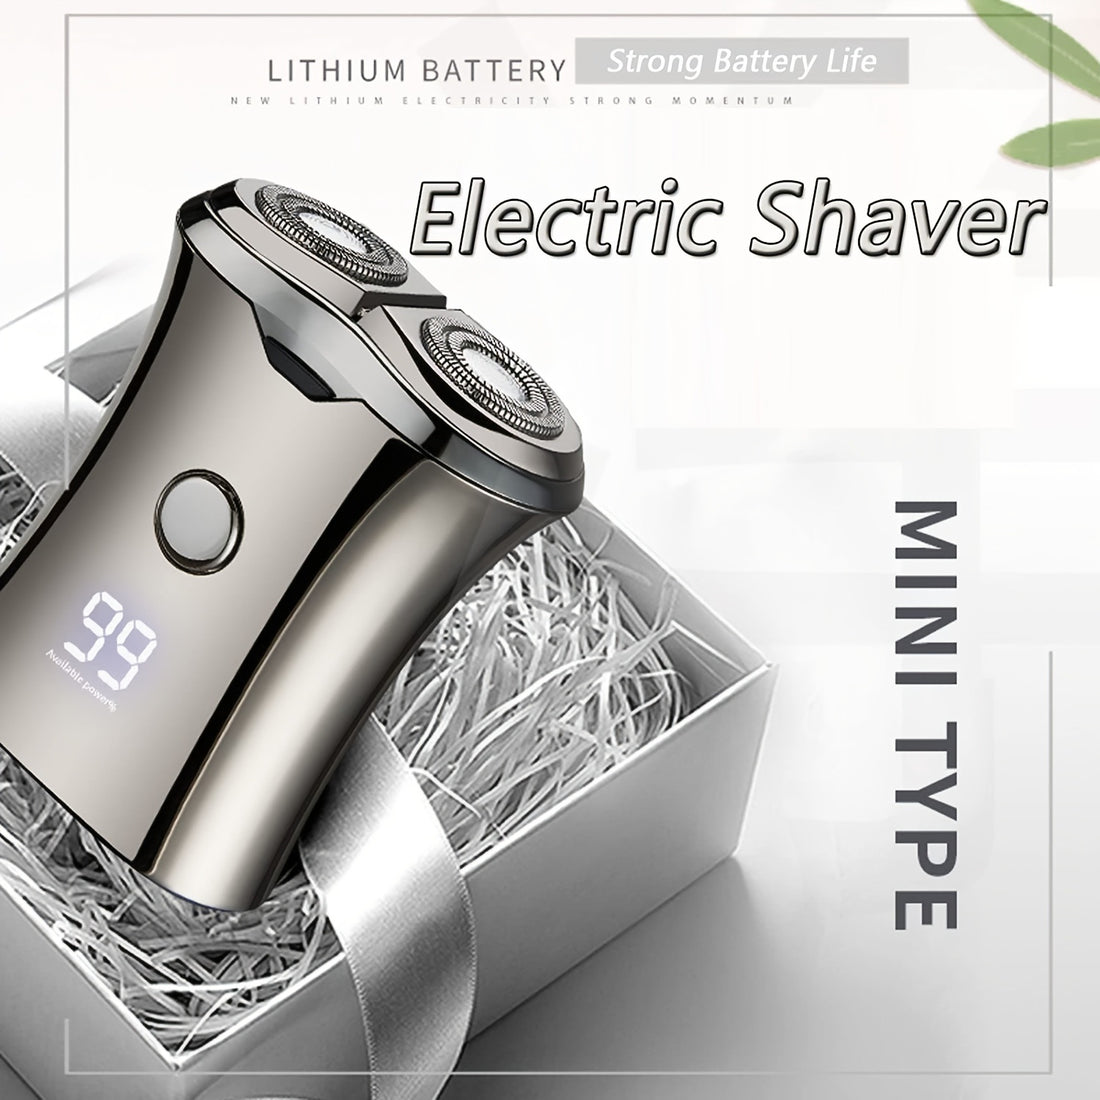 Portable Electric Shaver For Men Beard Trimmer Small Size Quick Charging; with Clean Brush Travel Men's Razors